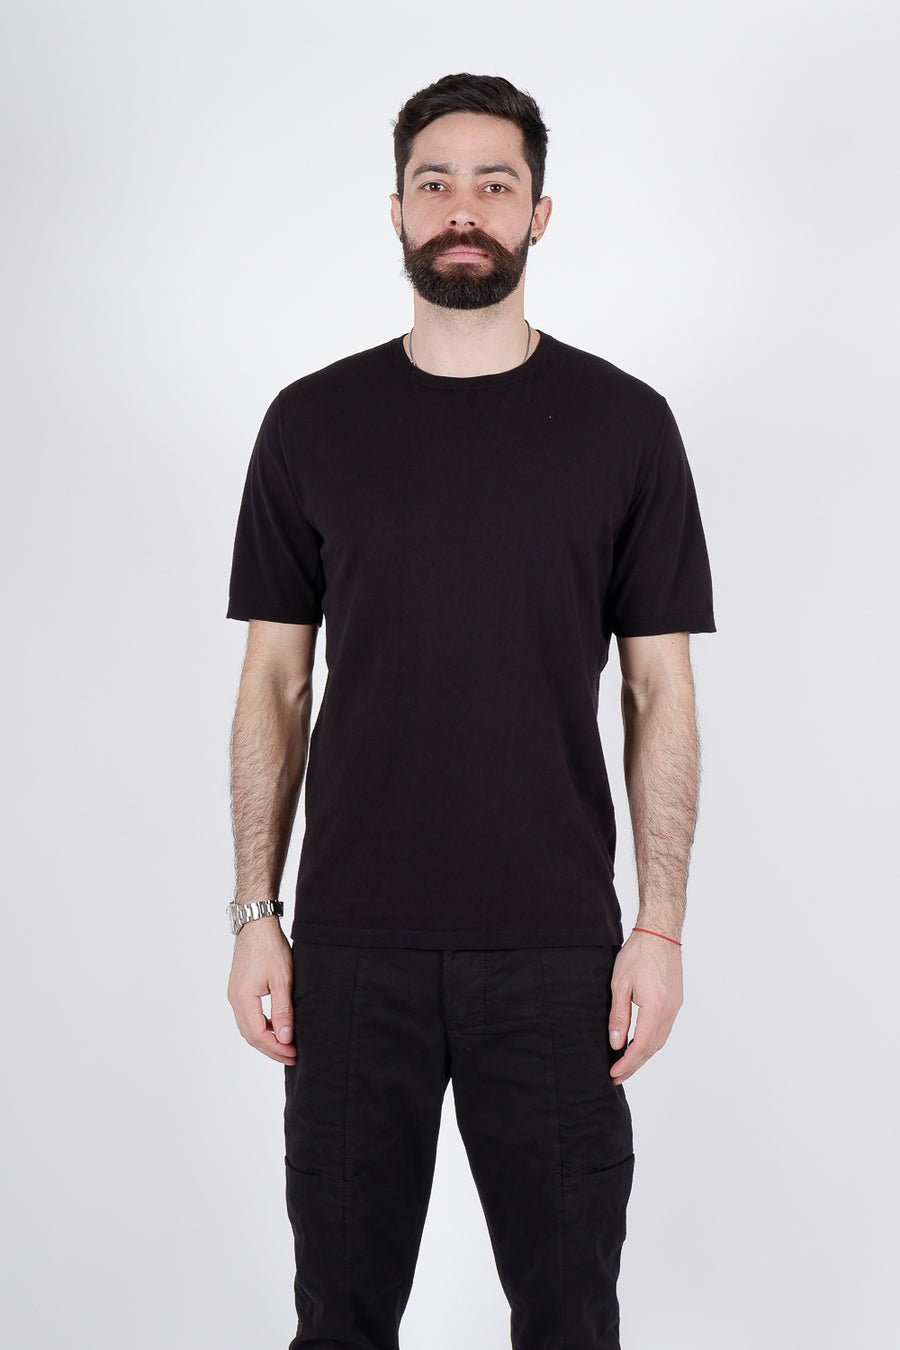 Buy the Transit Italian Cotton Round Neck T-Shirt in Black at Intro. Spend £50 for free UK delivery. Official stockists. We ship worldwide.